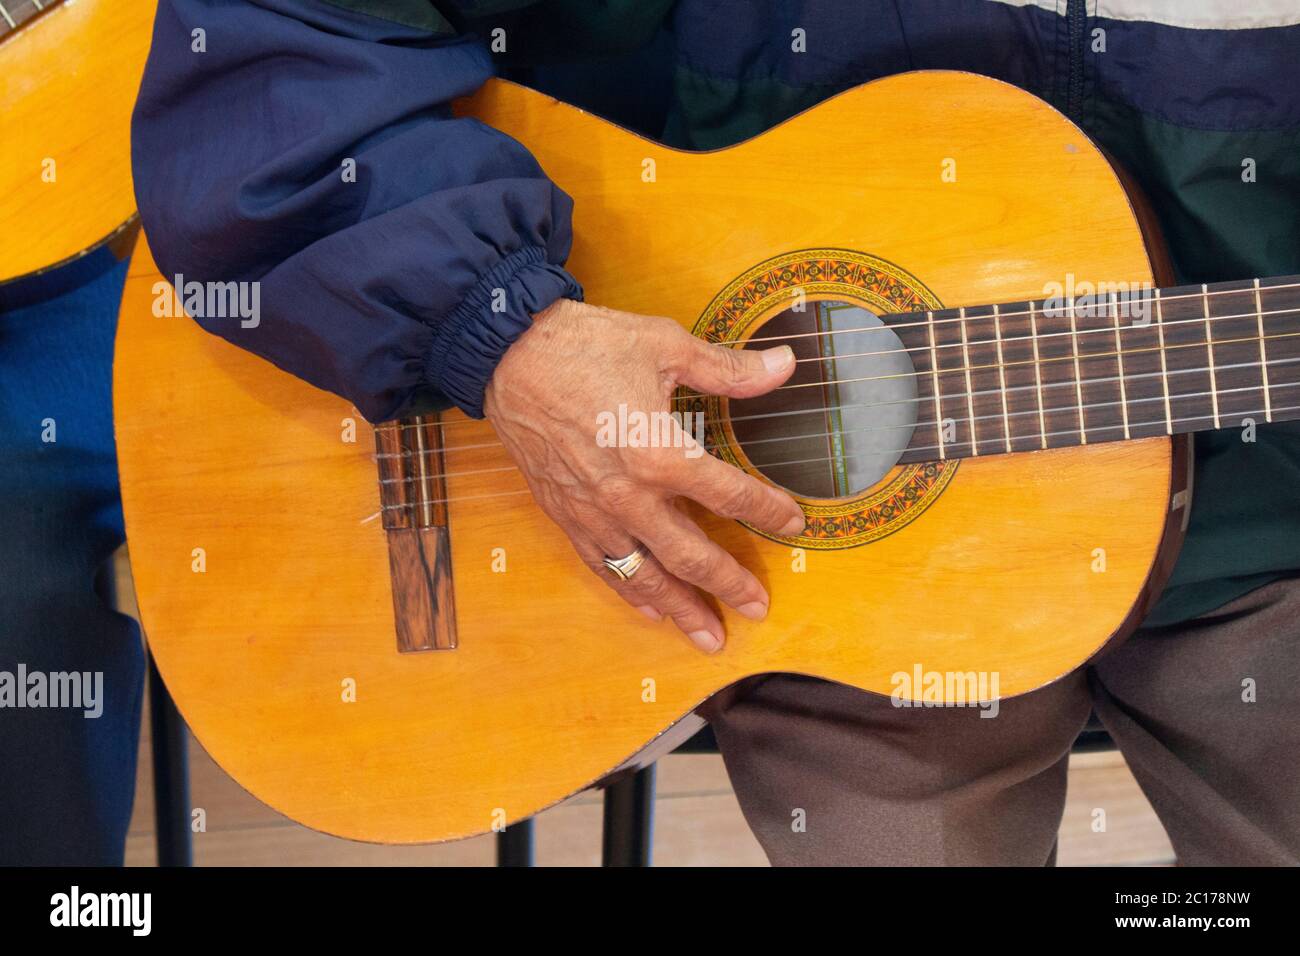 Approach to the hand of an elderly man sitting holding a guitar dressed in a blue shirt with a ring on his finger Stock Photo